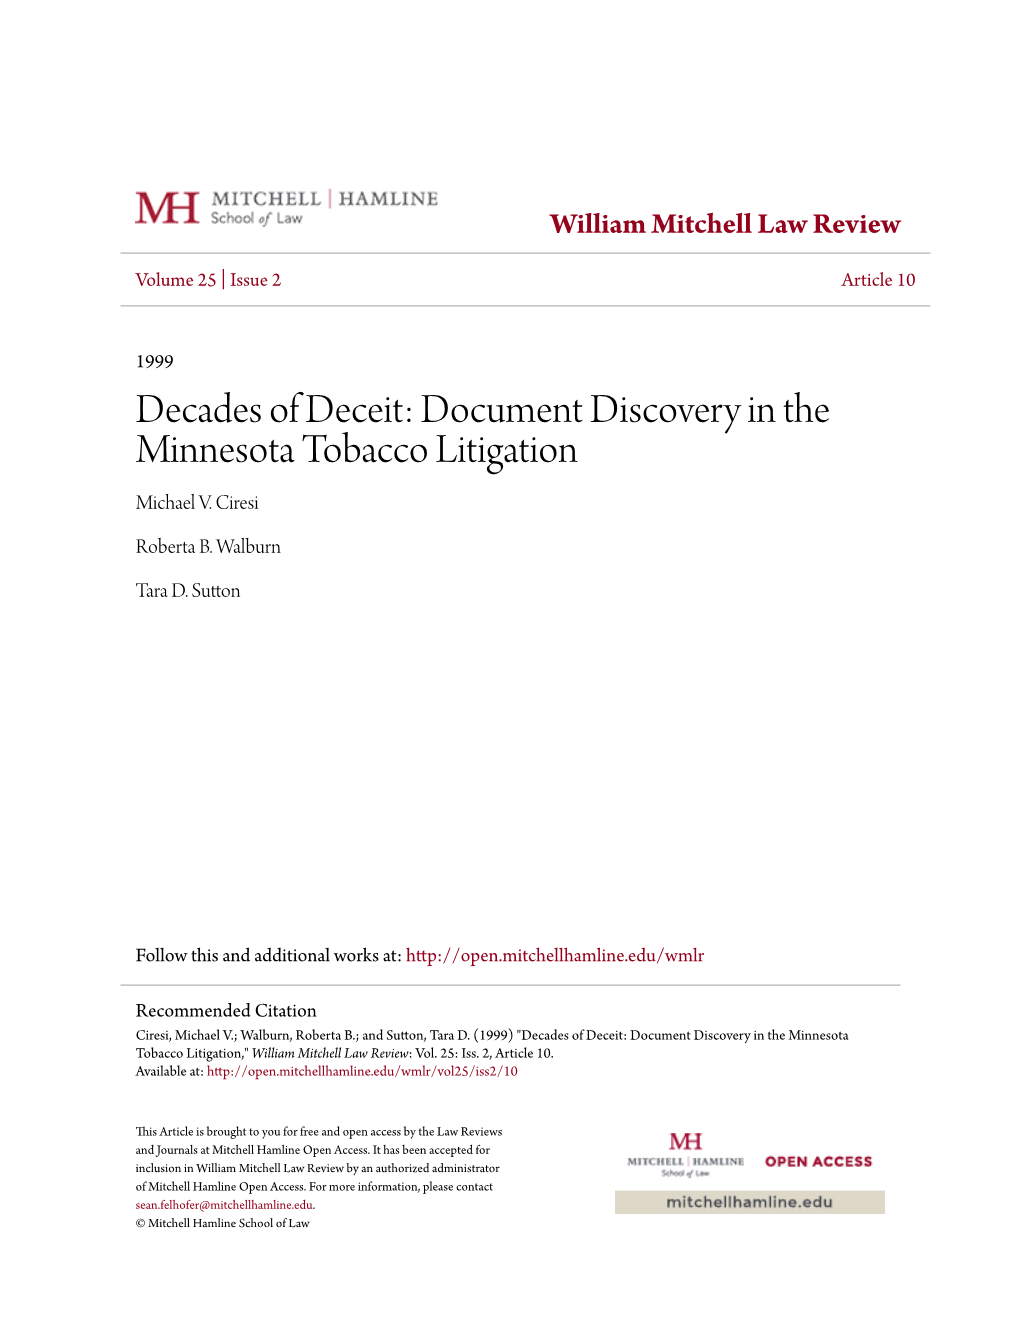 Decades of Deceit: Document Discovery in the Minnesota Tobacco Litigation Michael V